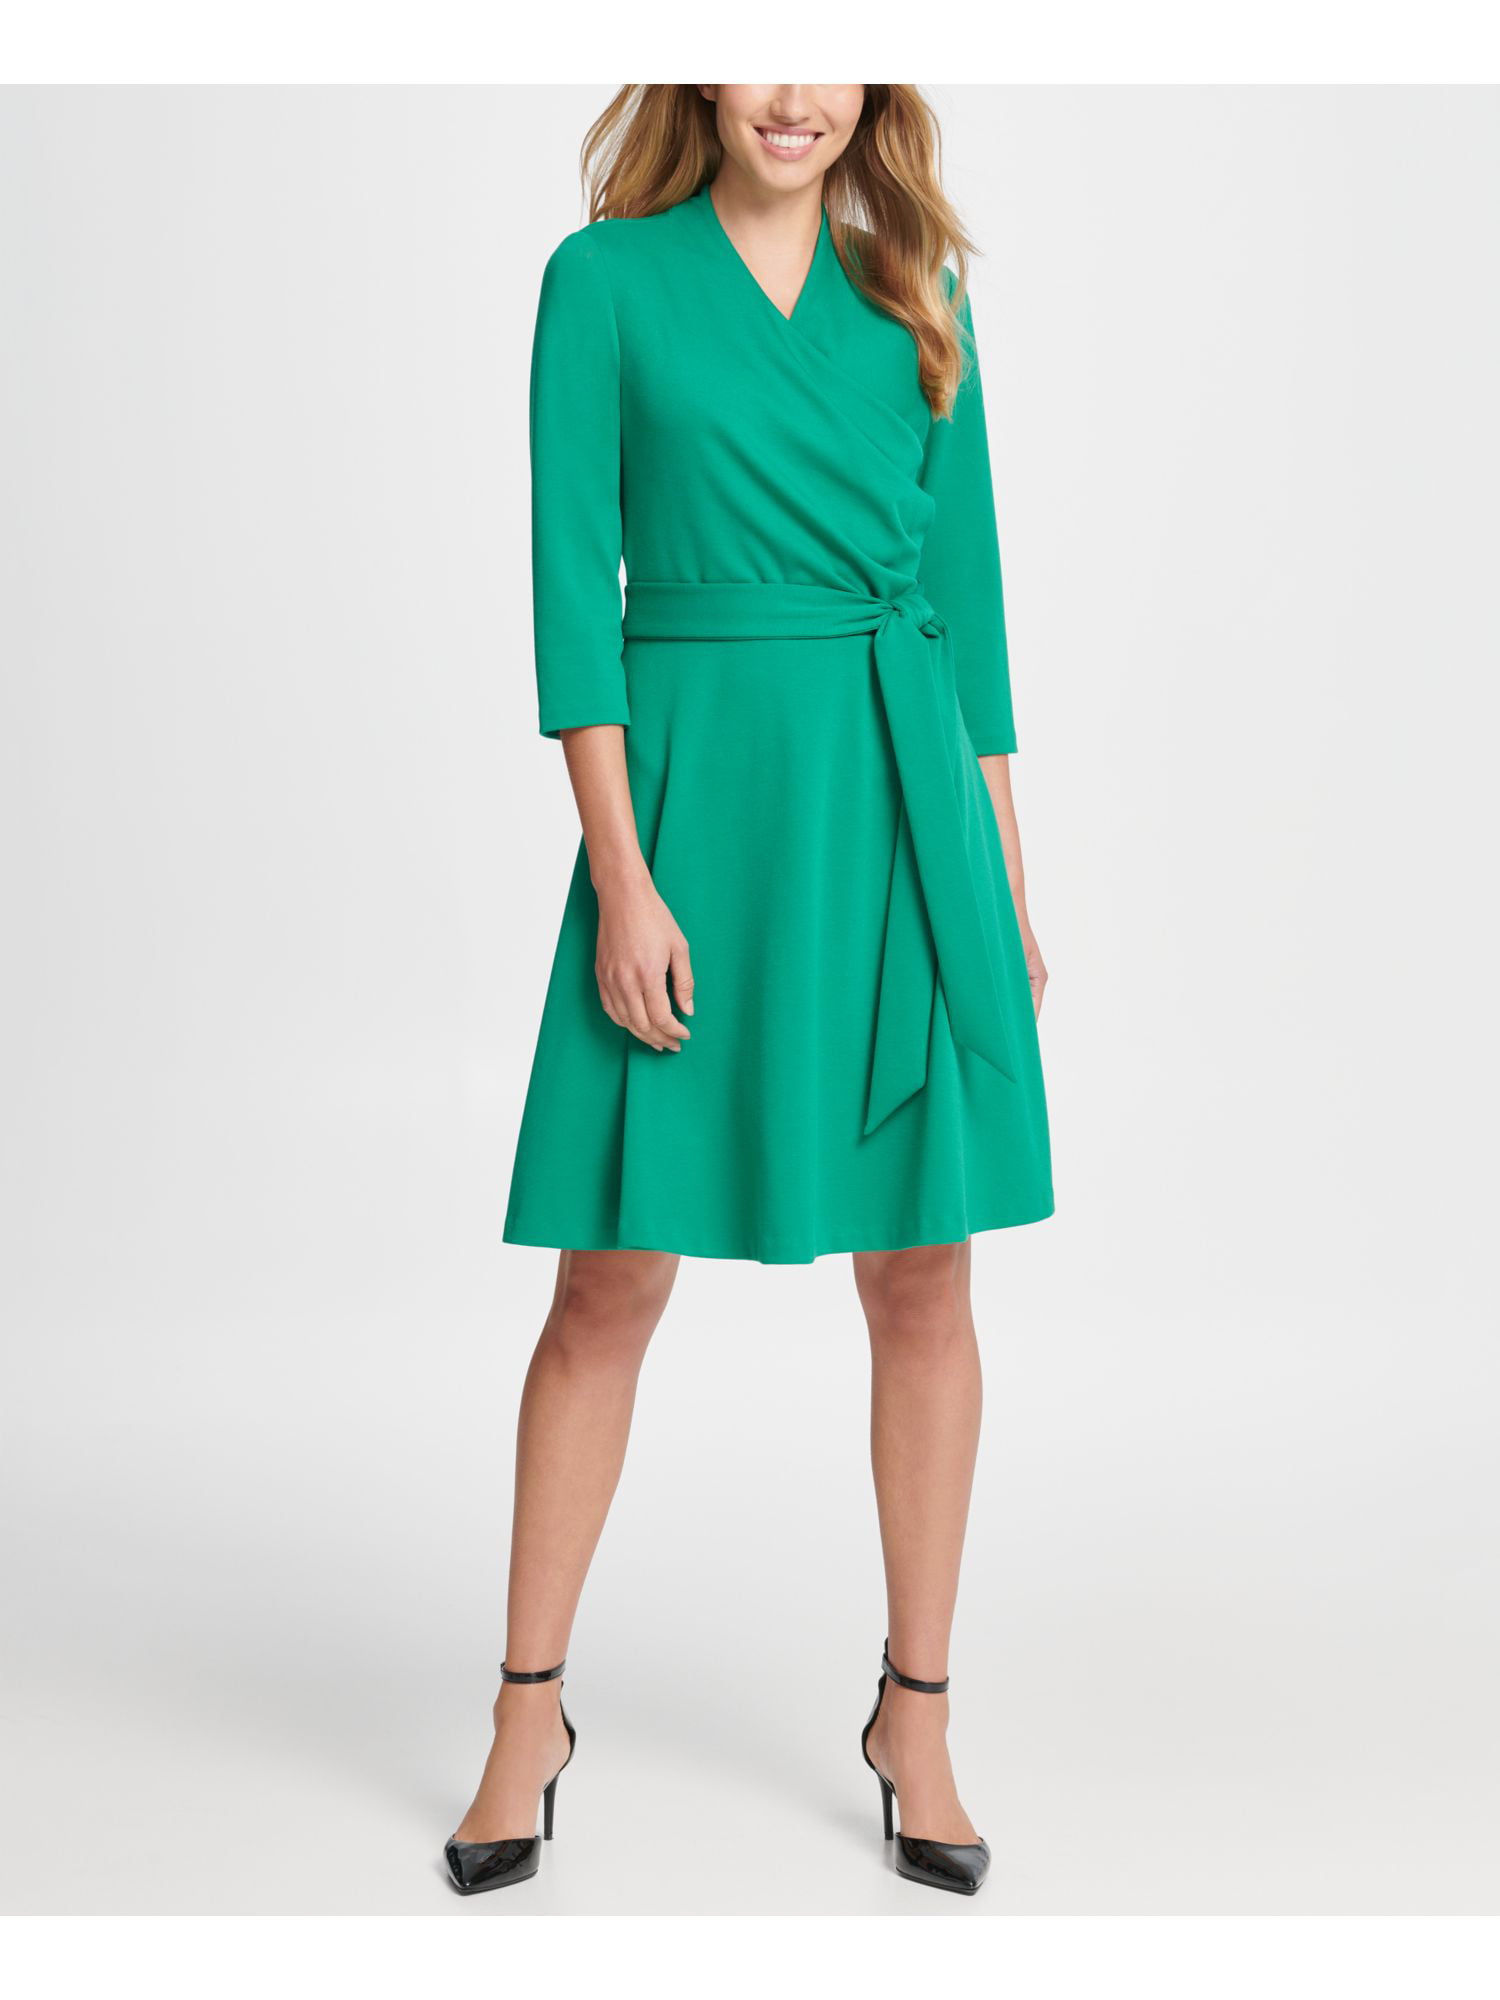 DKNY - DKNY Womens Green Belted 3/4 Sleeve V Neck Above The Knee Wrap